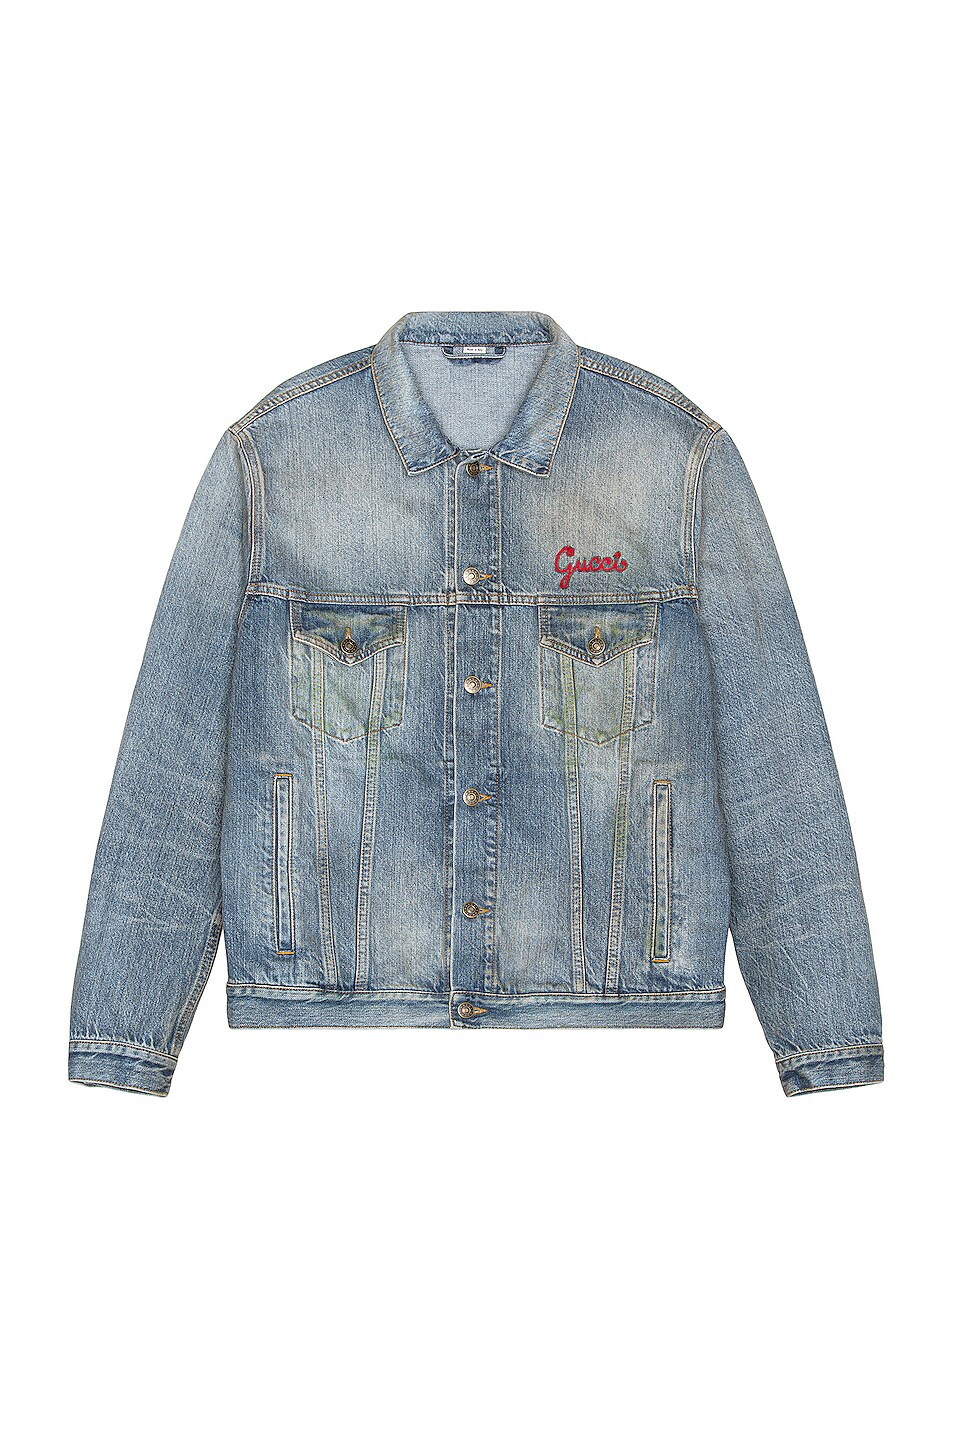 Image 1 of Gucci Denim Shirt in Light Blue & Mix